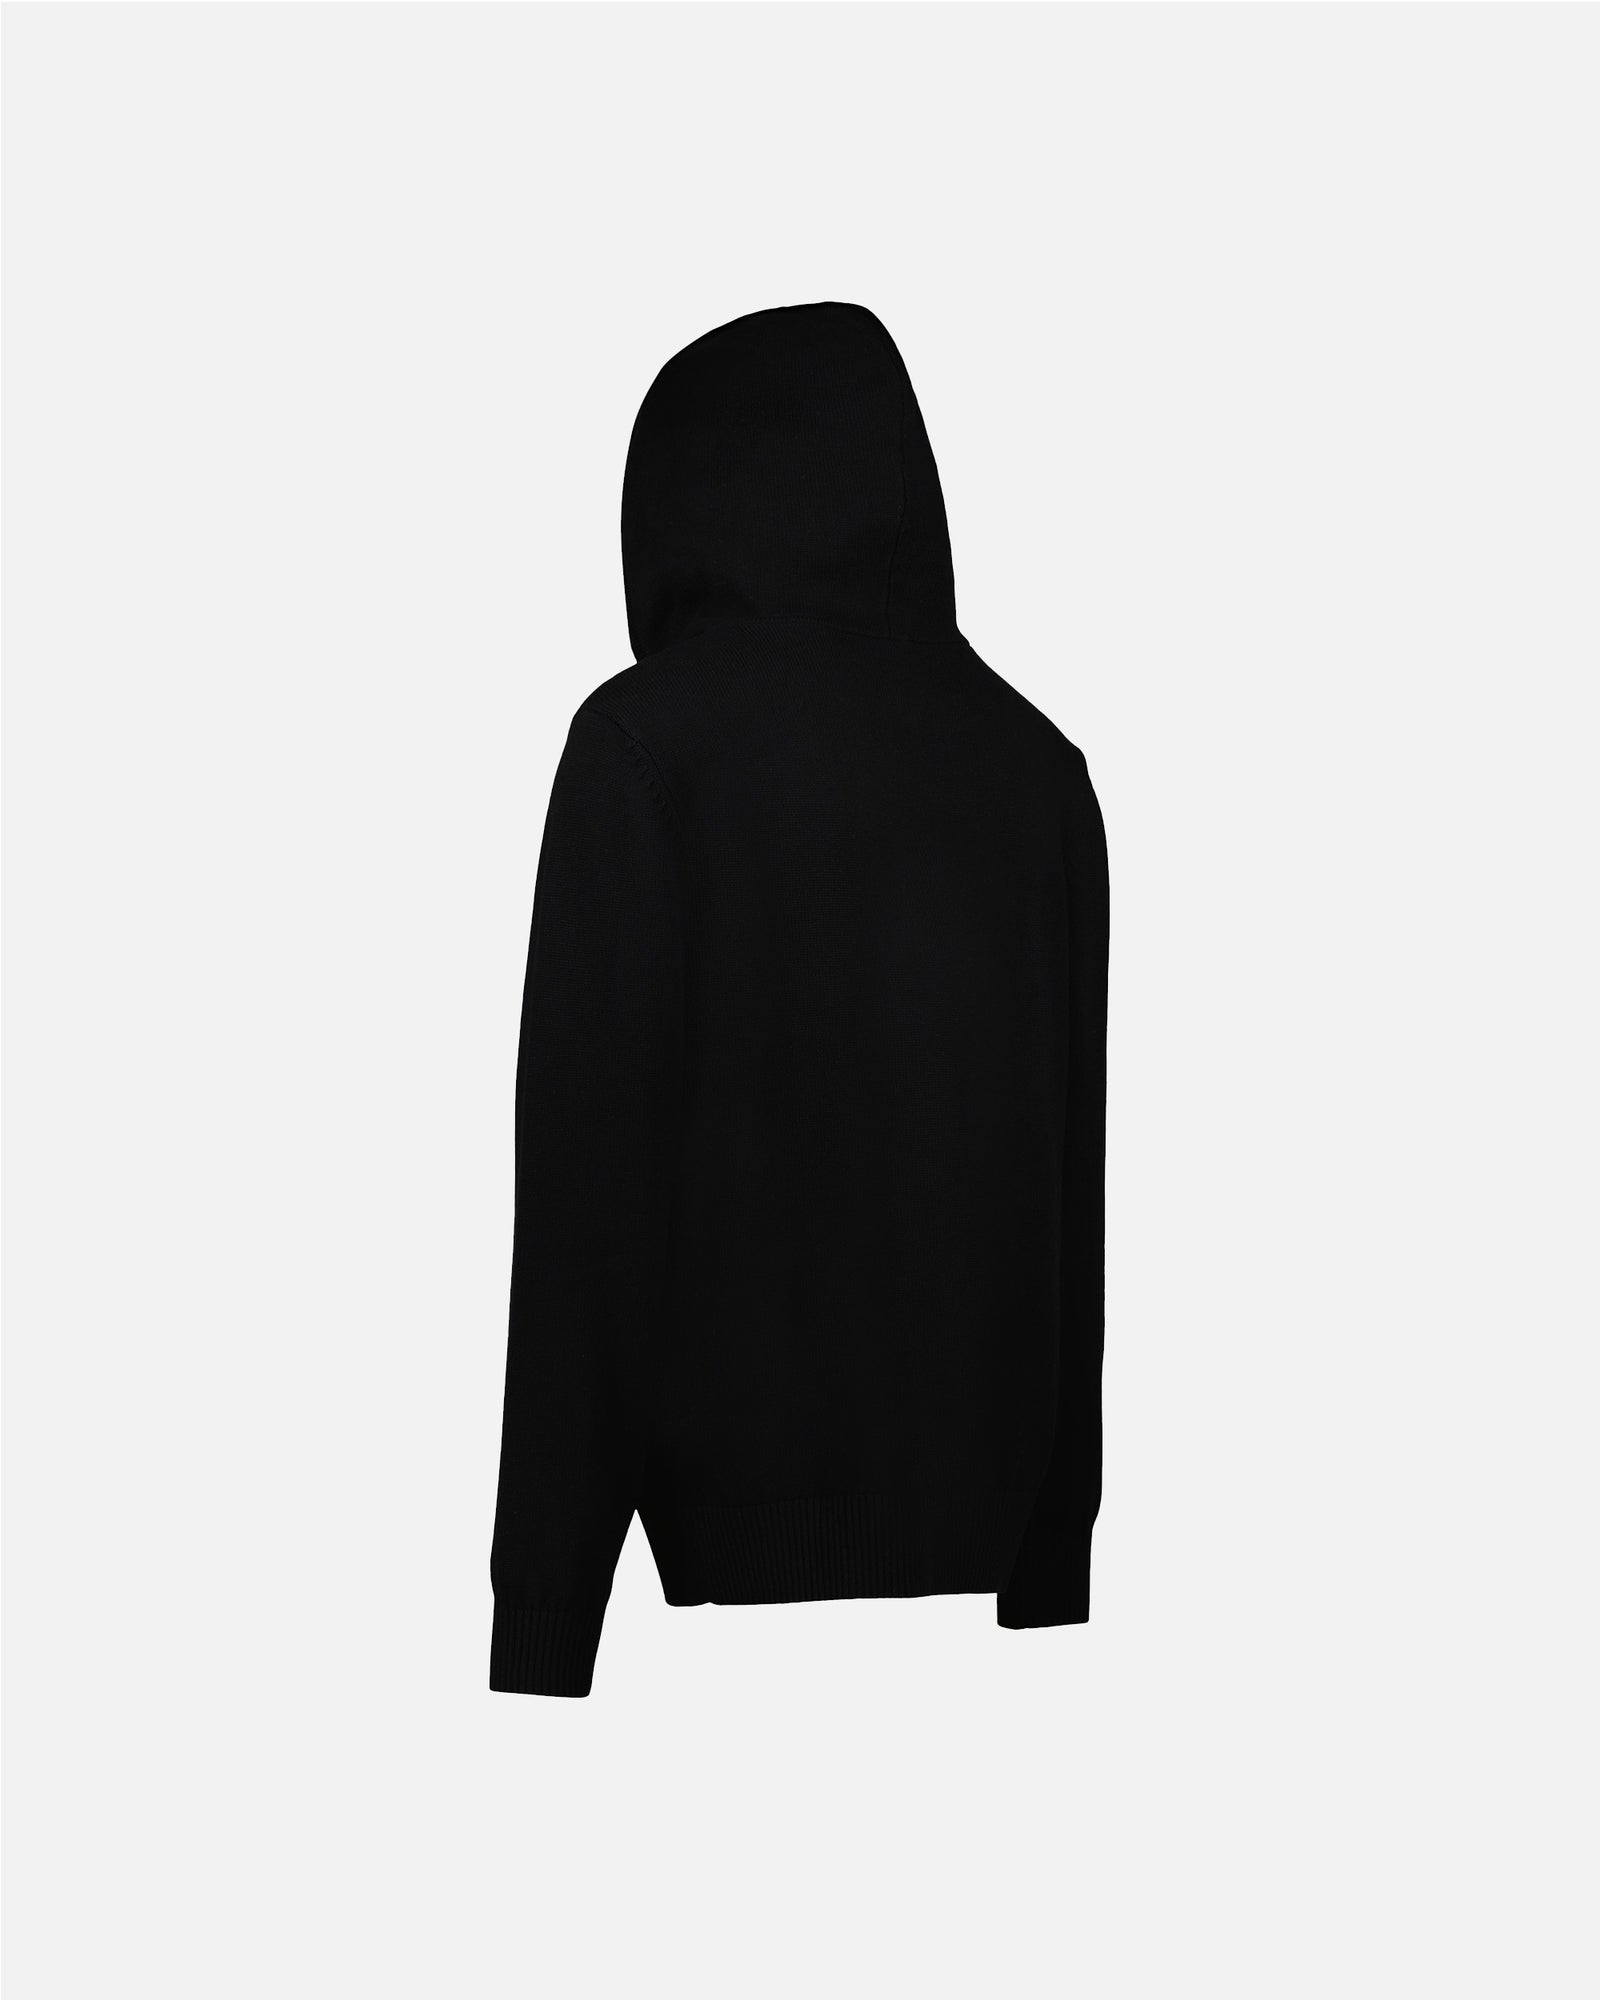 KNITTED SIGNATURE HOODIE - FINAL SALE